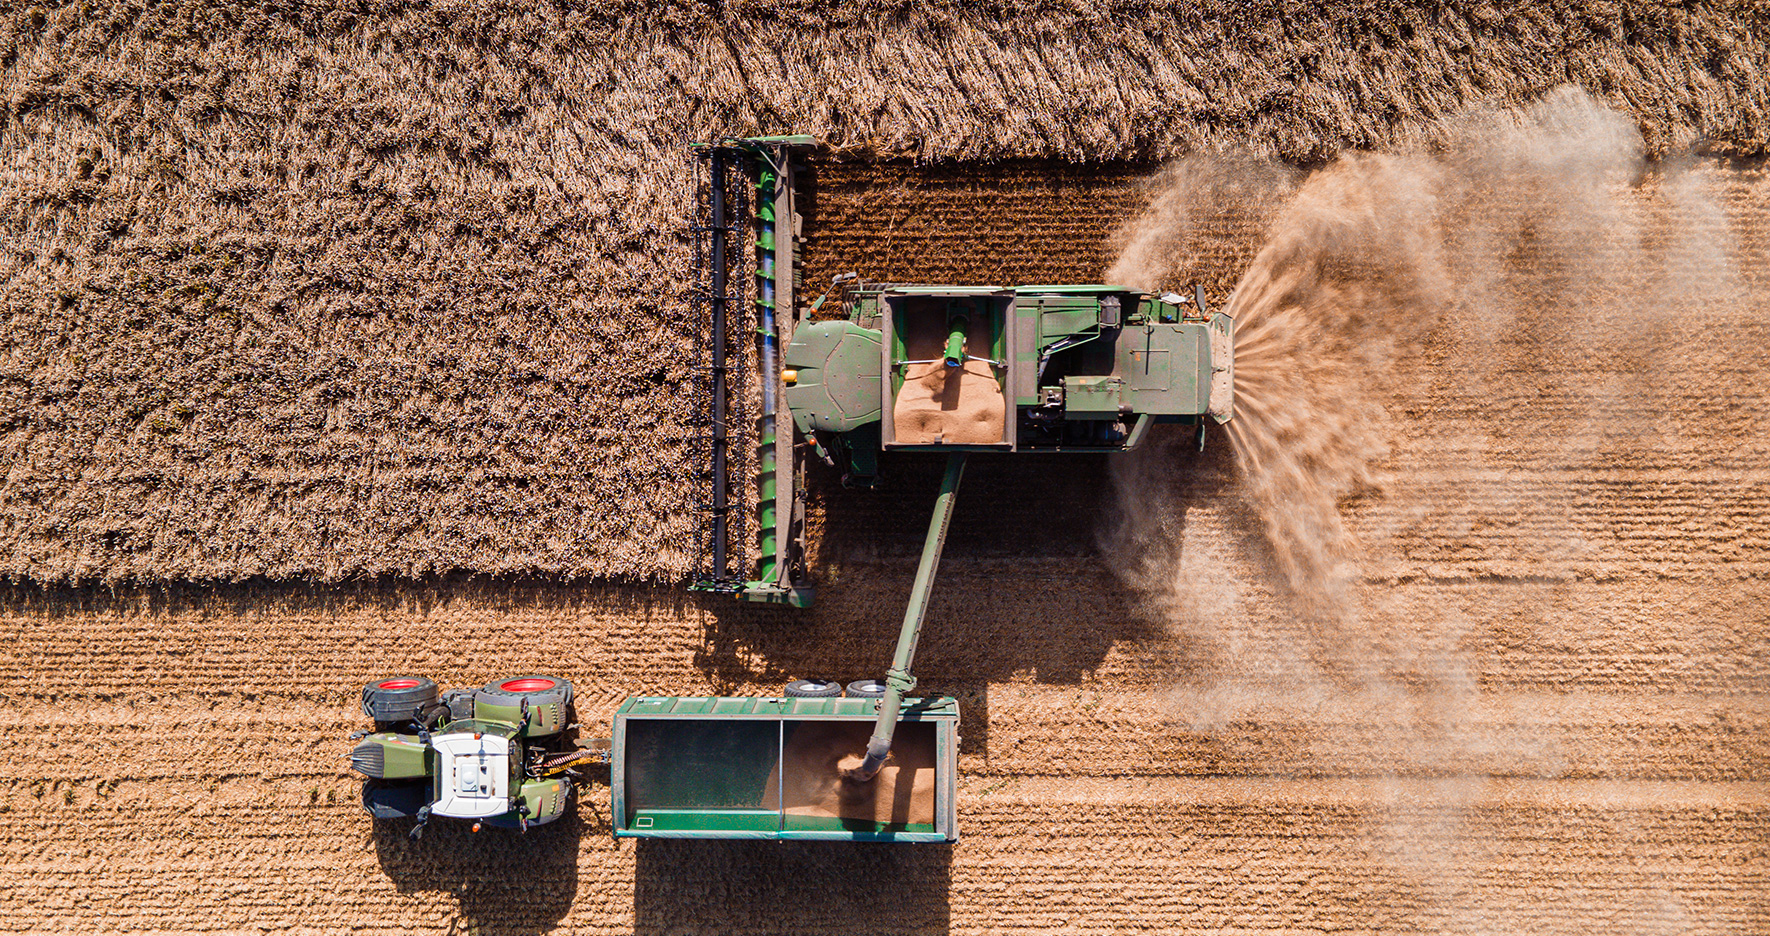 Aerial view of tractors during harvest